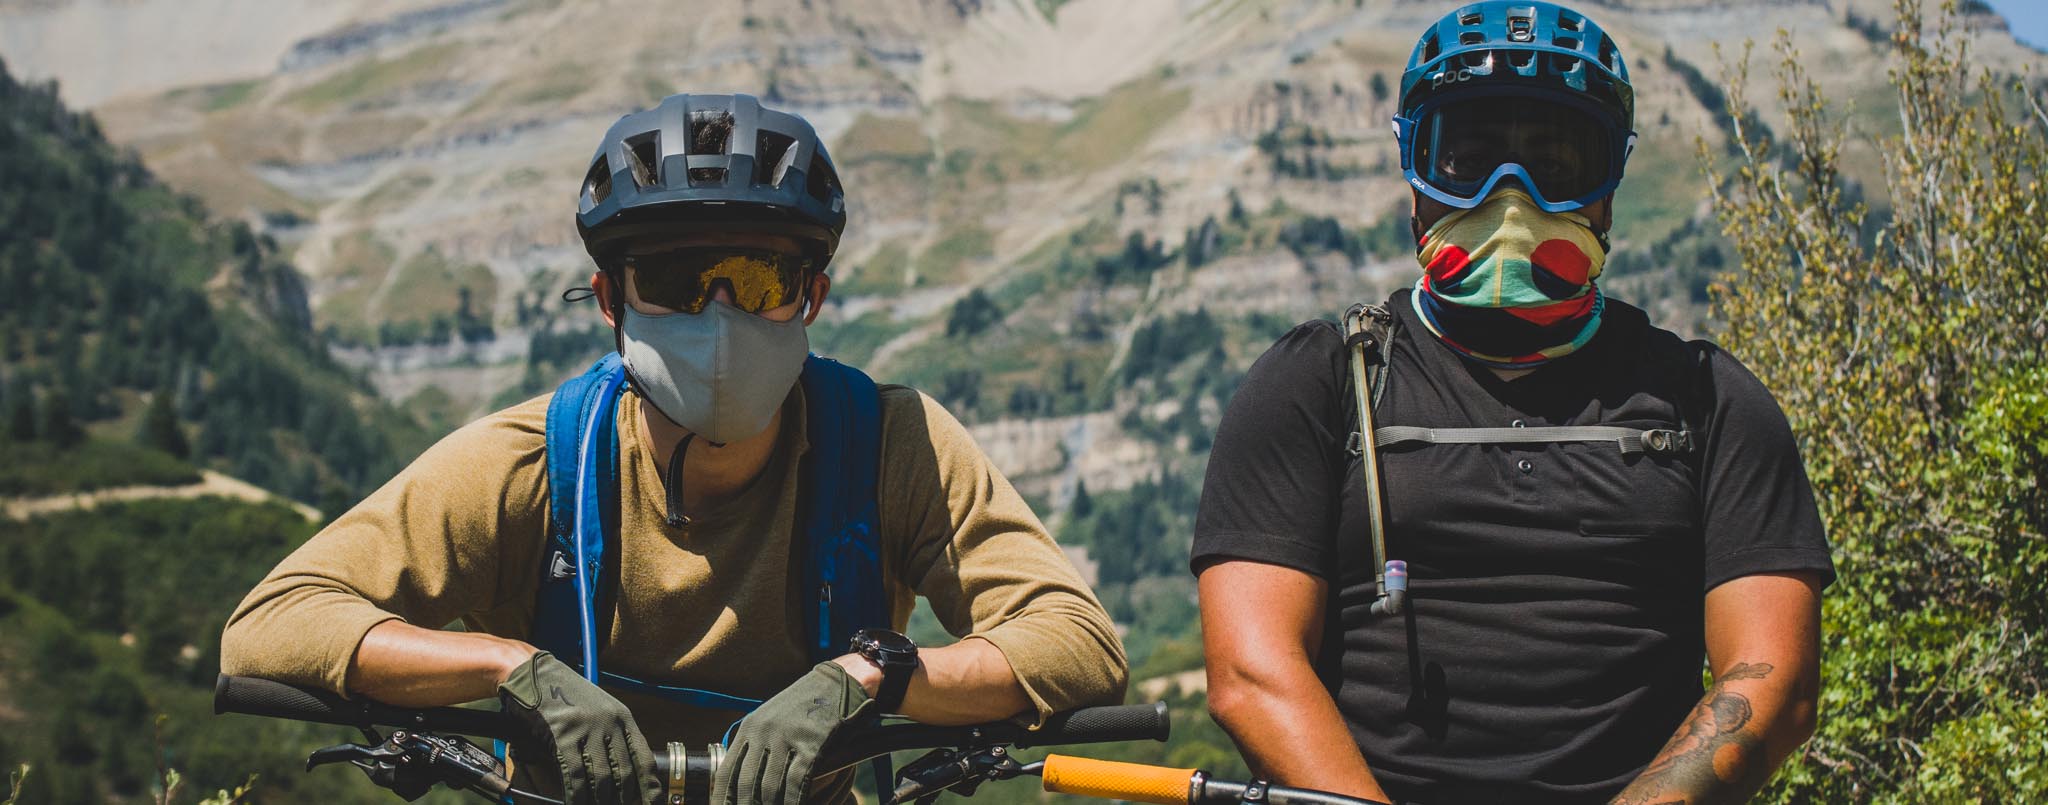 Mountain Bikers With Masks in Salt Lake City